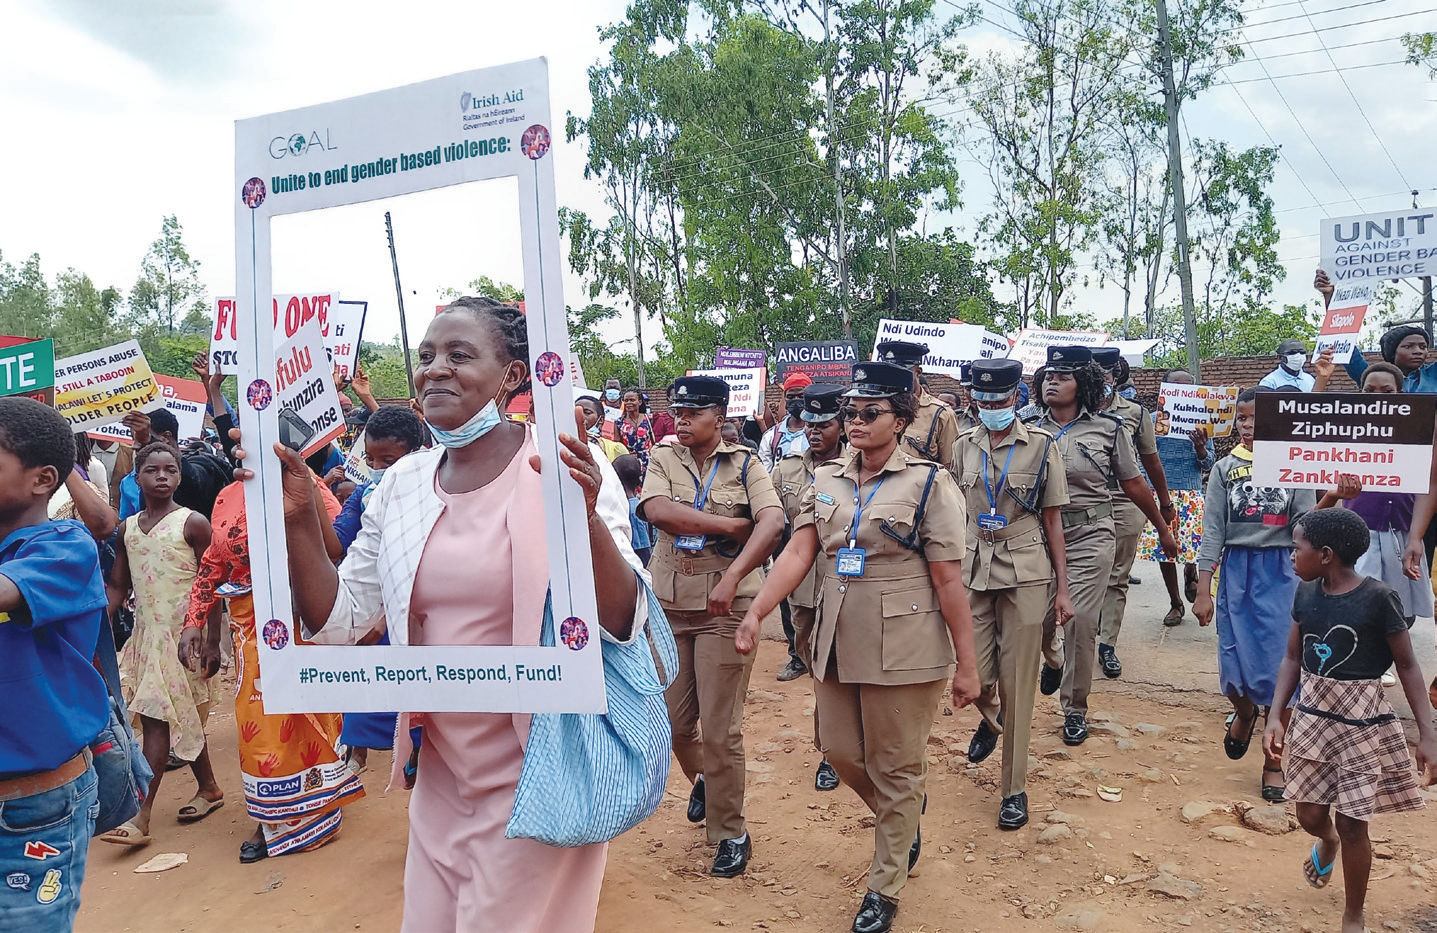 Some Blantyre residents and stakeholders march against GBV